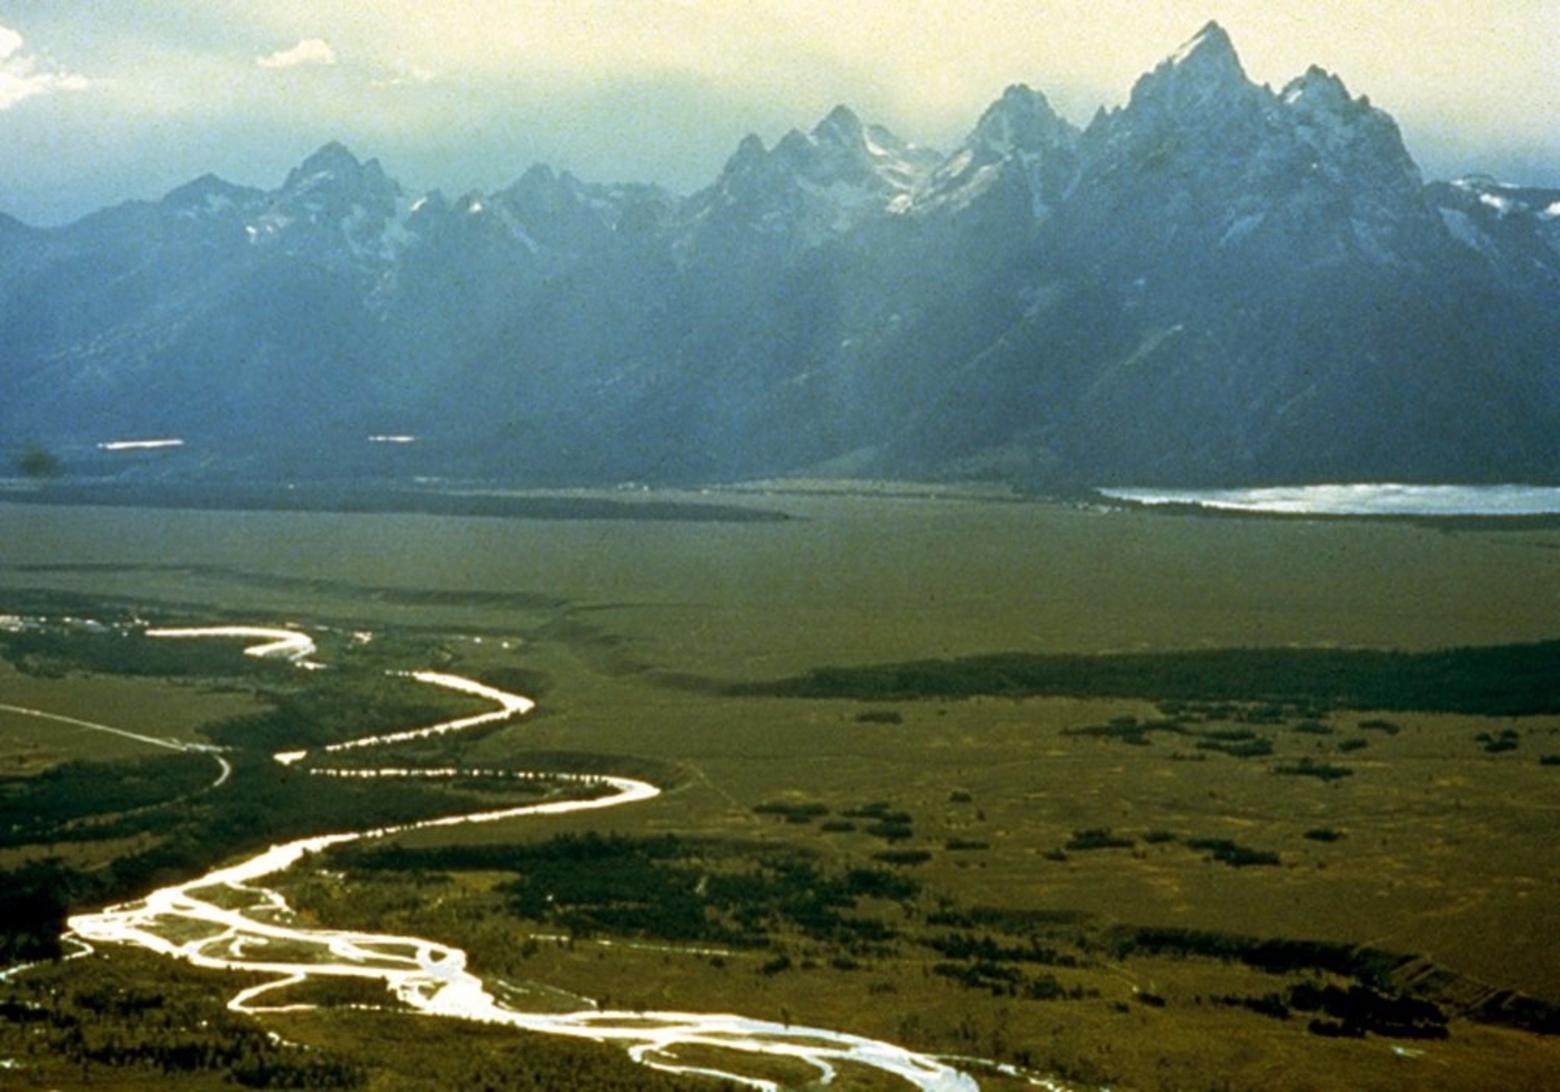 The river known as Ki-moo-e-nim and Yam-pah-pa to the Shoshone tribe, cuts a serpentine course through Jackson Hole beneath the Tetons. While white people coming into the country named it the Snake River, the aboriginal name referenced an herb that grows prolifically along its banks. Photo courtesy Wikipedia